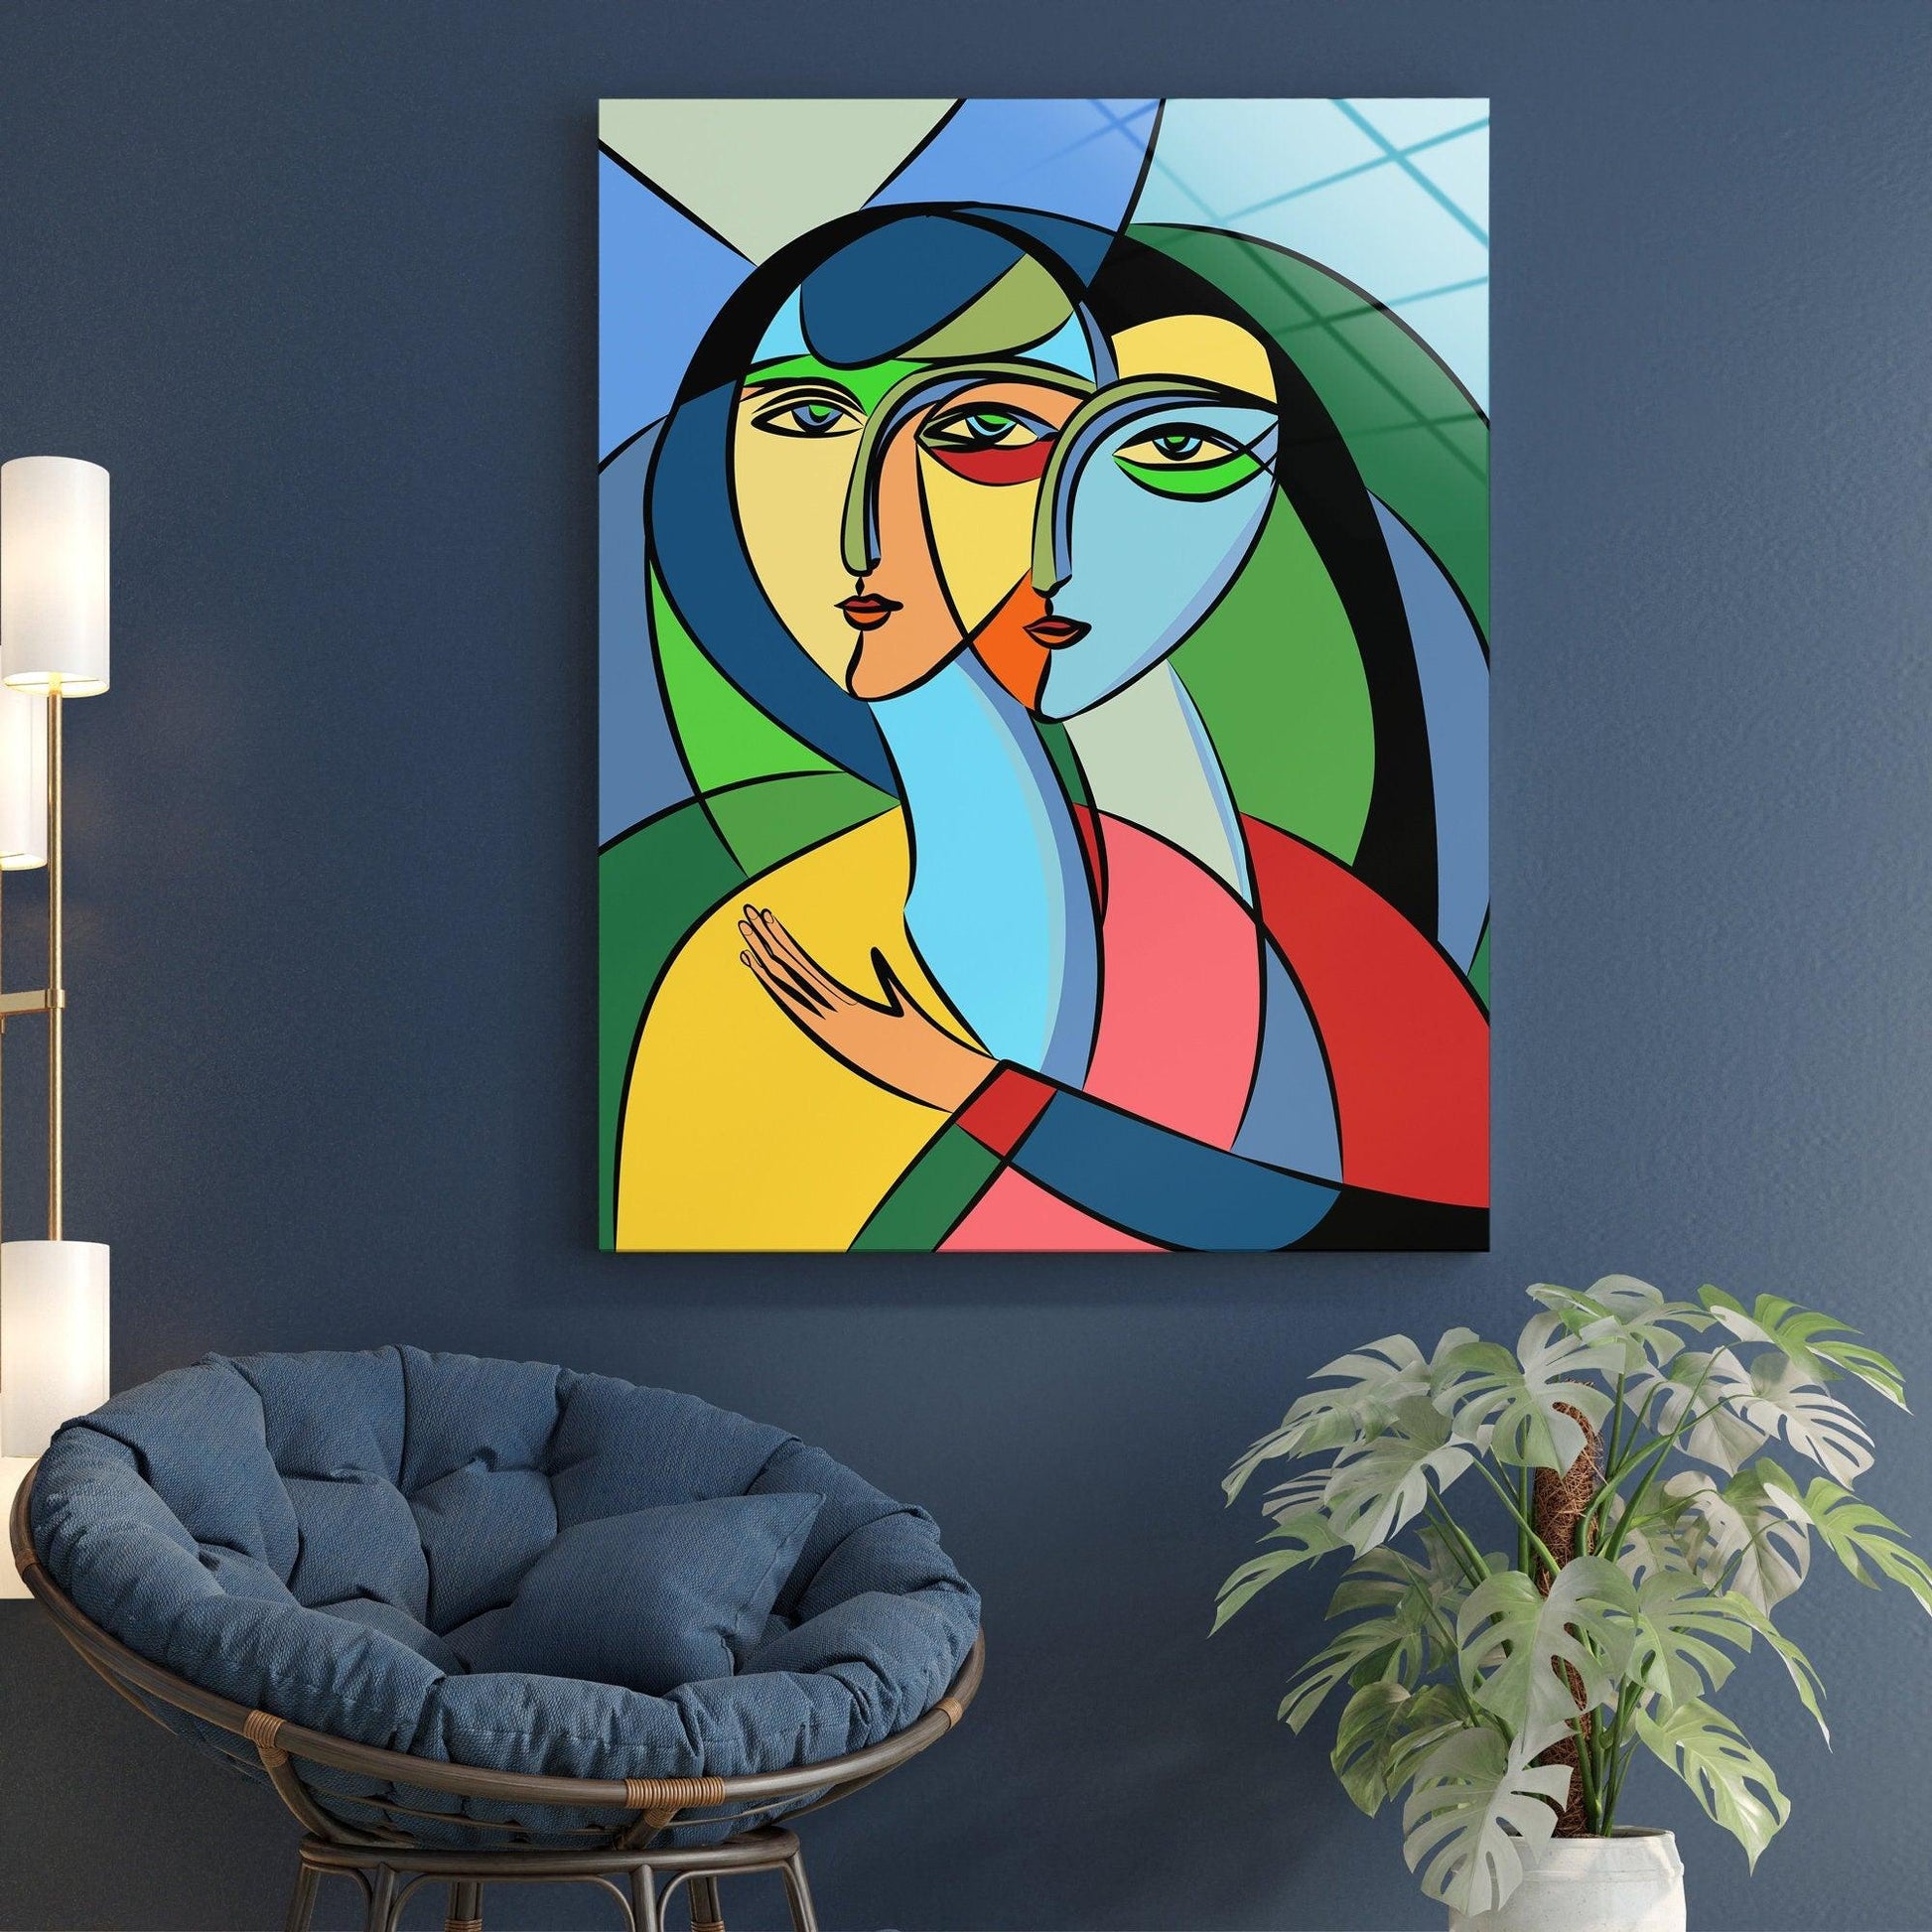 abstract Glass printing Wall Art| Home Decor Gift, Large Wall Decor, Painting Wall Art, Colorful Cubism canvas wall art, office decor gift